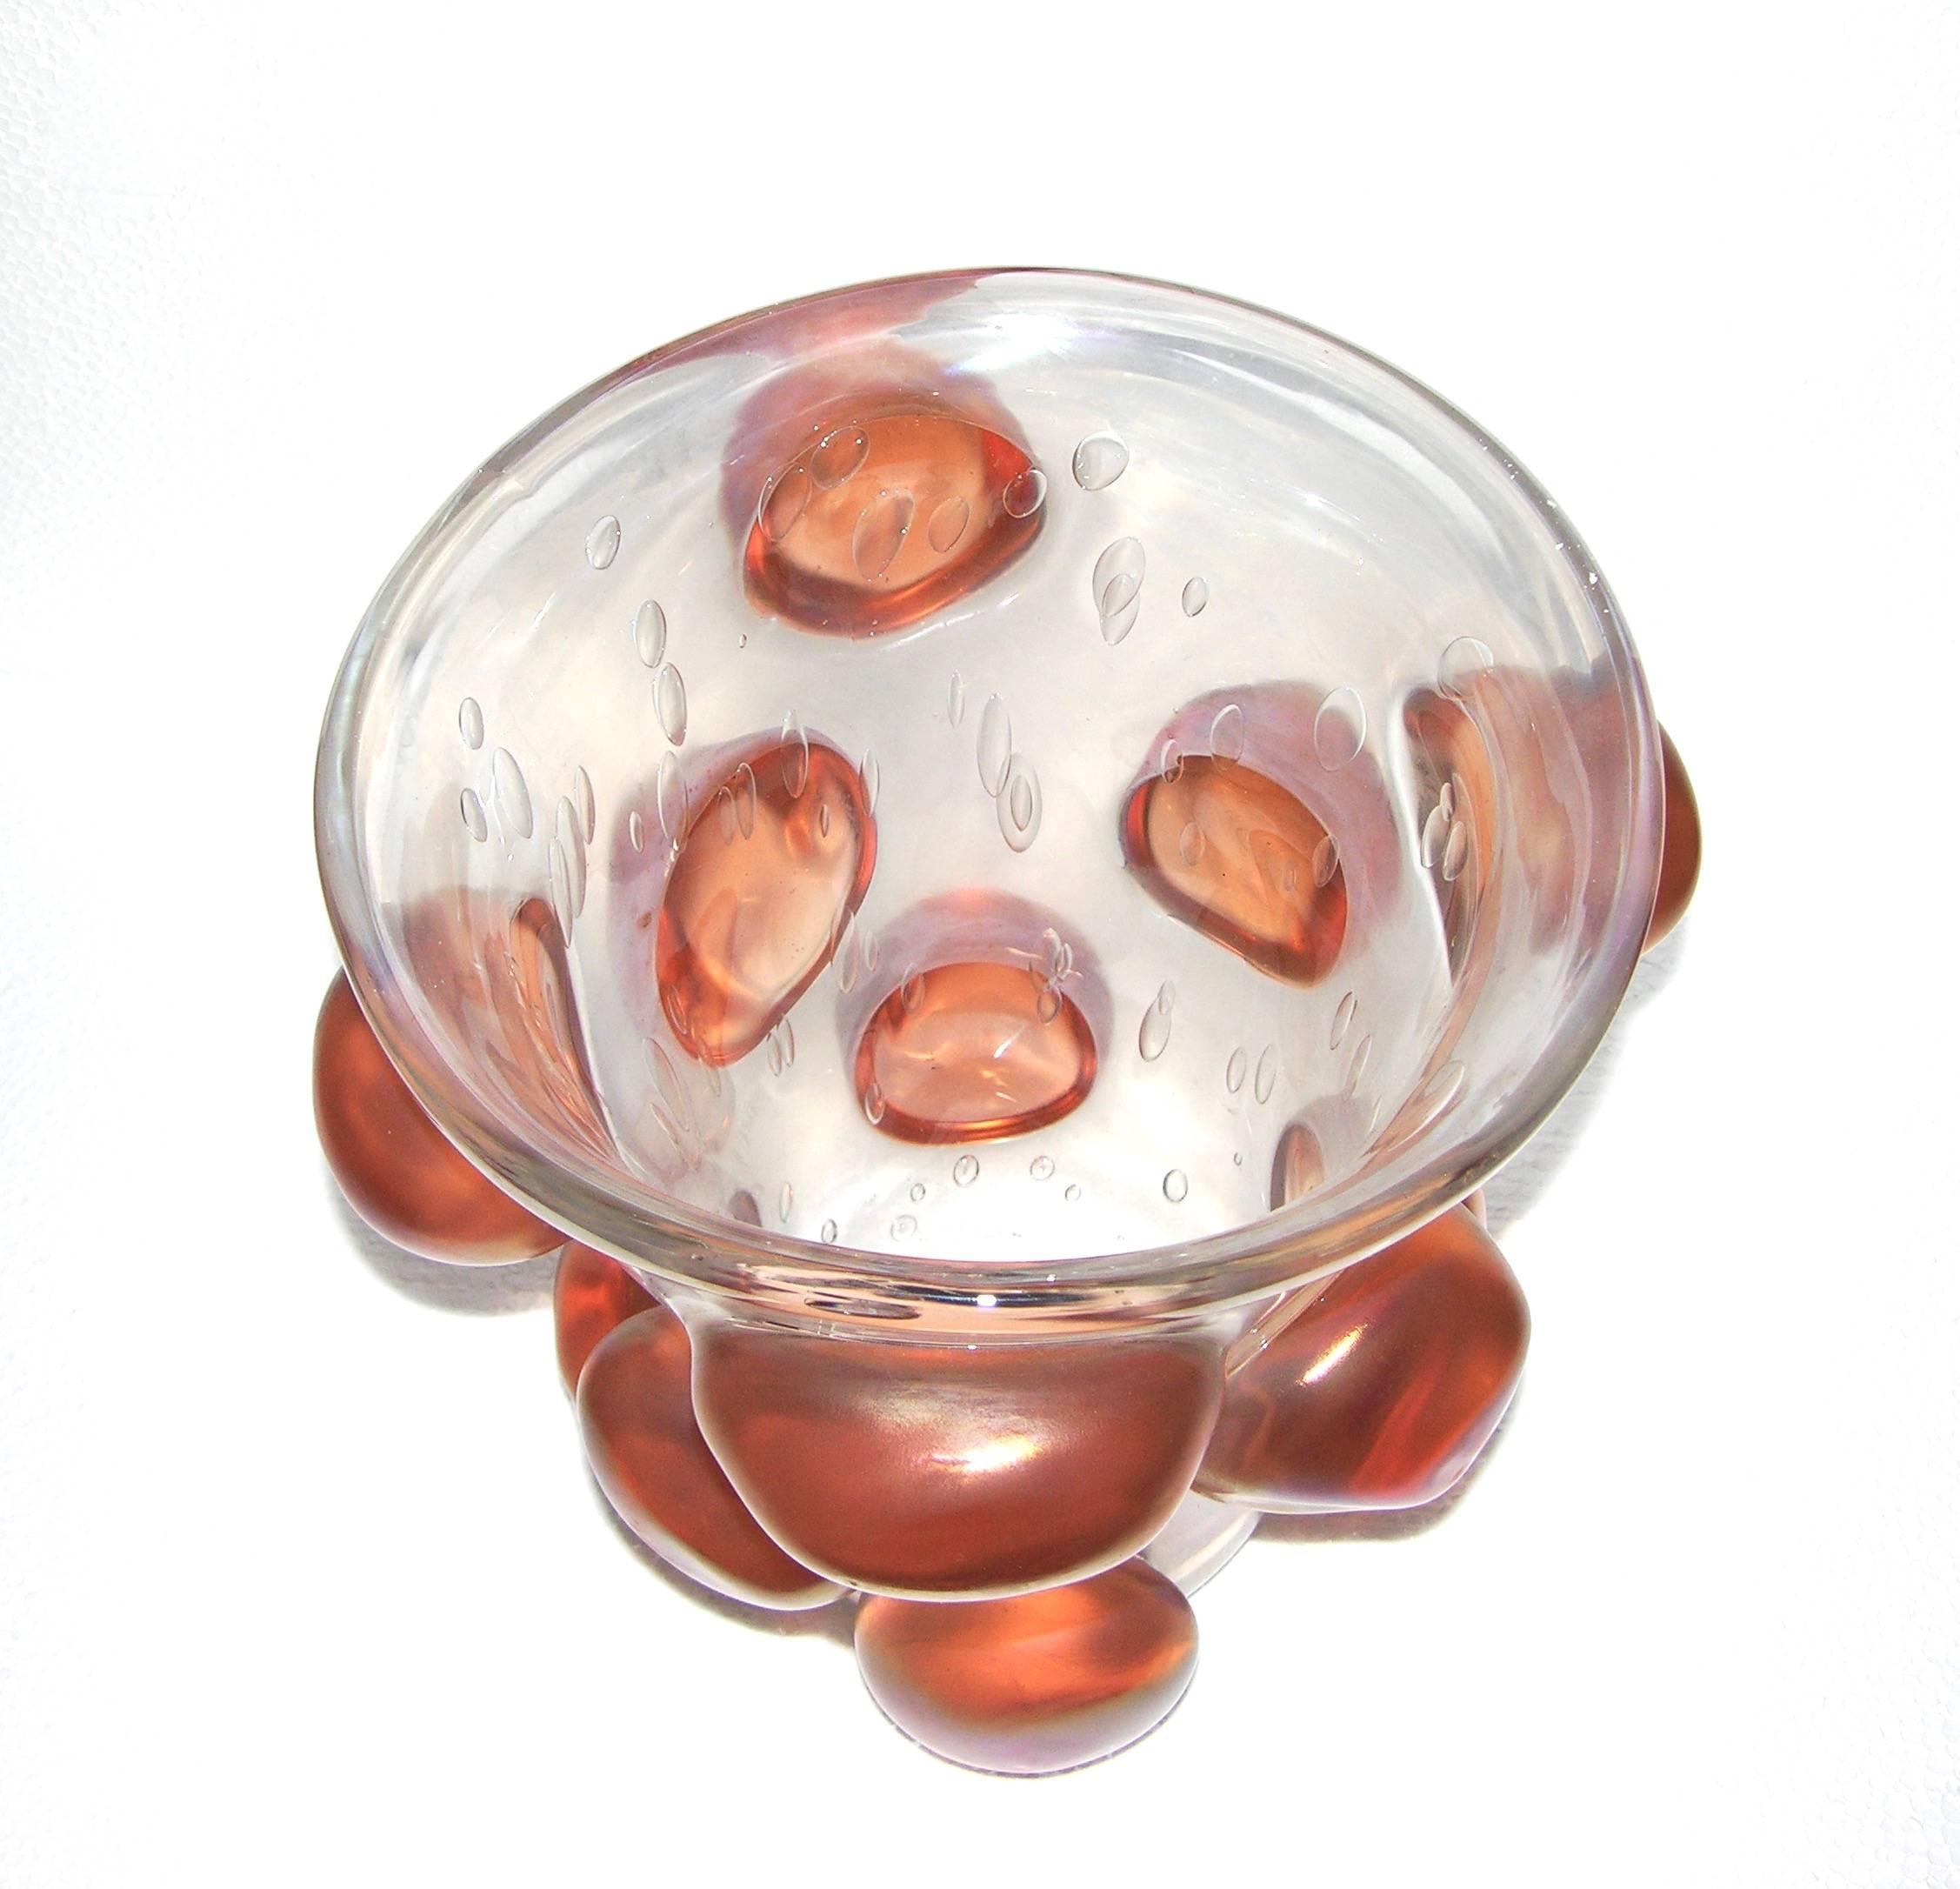 1970s Italian blown Murano glass with high quality of execution. The clear glass is worked with bullicante (big bubbles in the glass) that creates a pattern enriching the texture. The decoration adds to the statement of the large size with